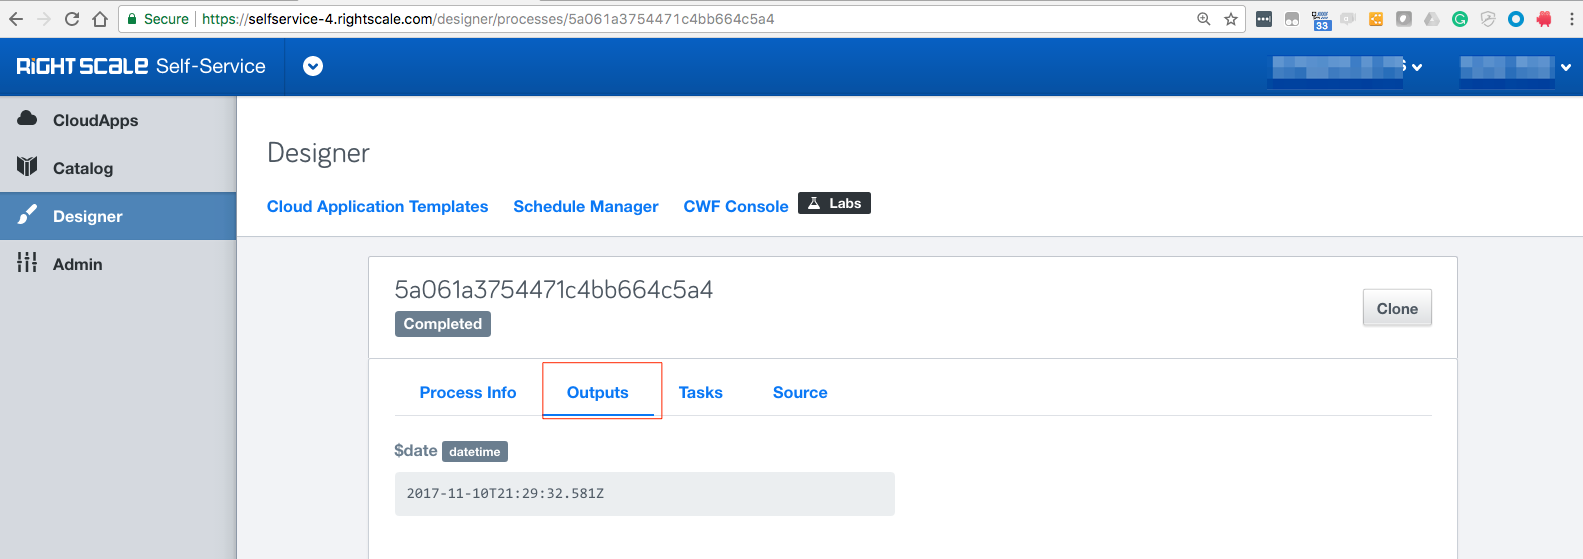 ss-cwf-console-example-2-show-date-outputs-3.png